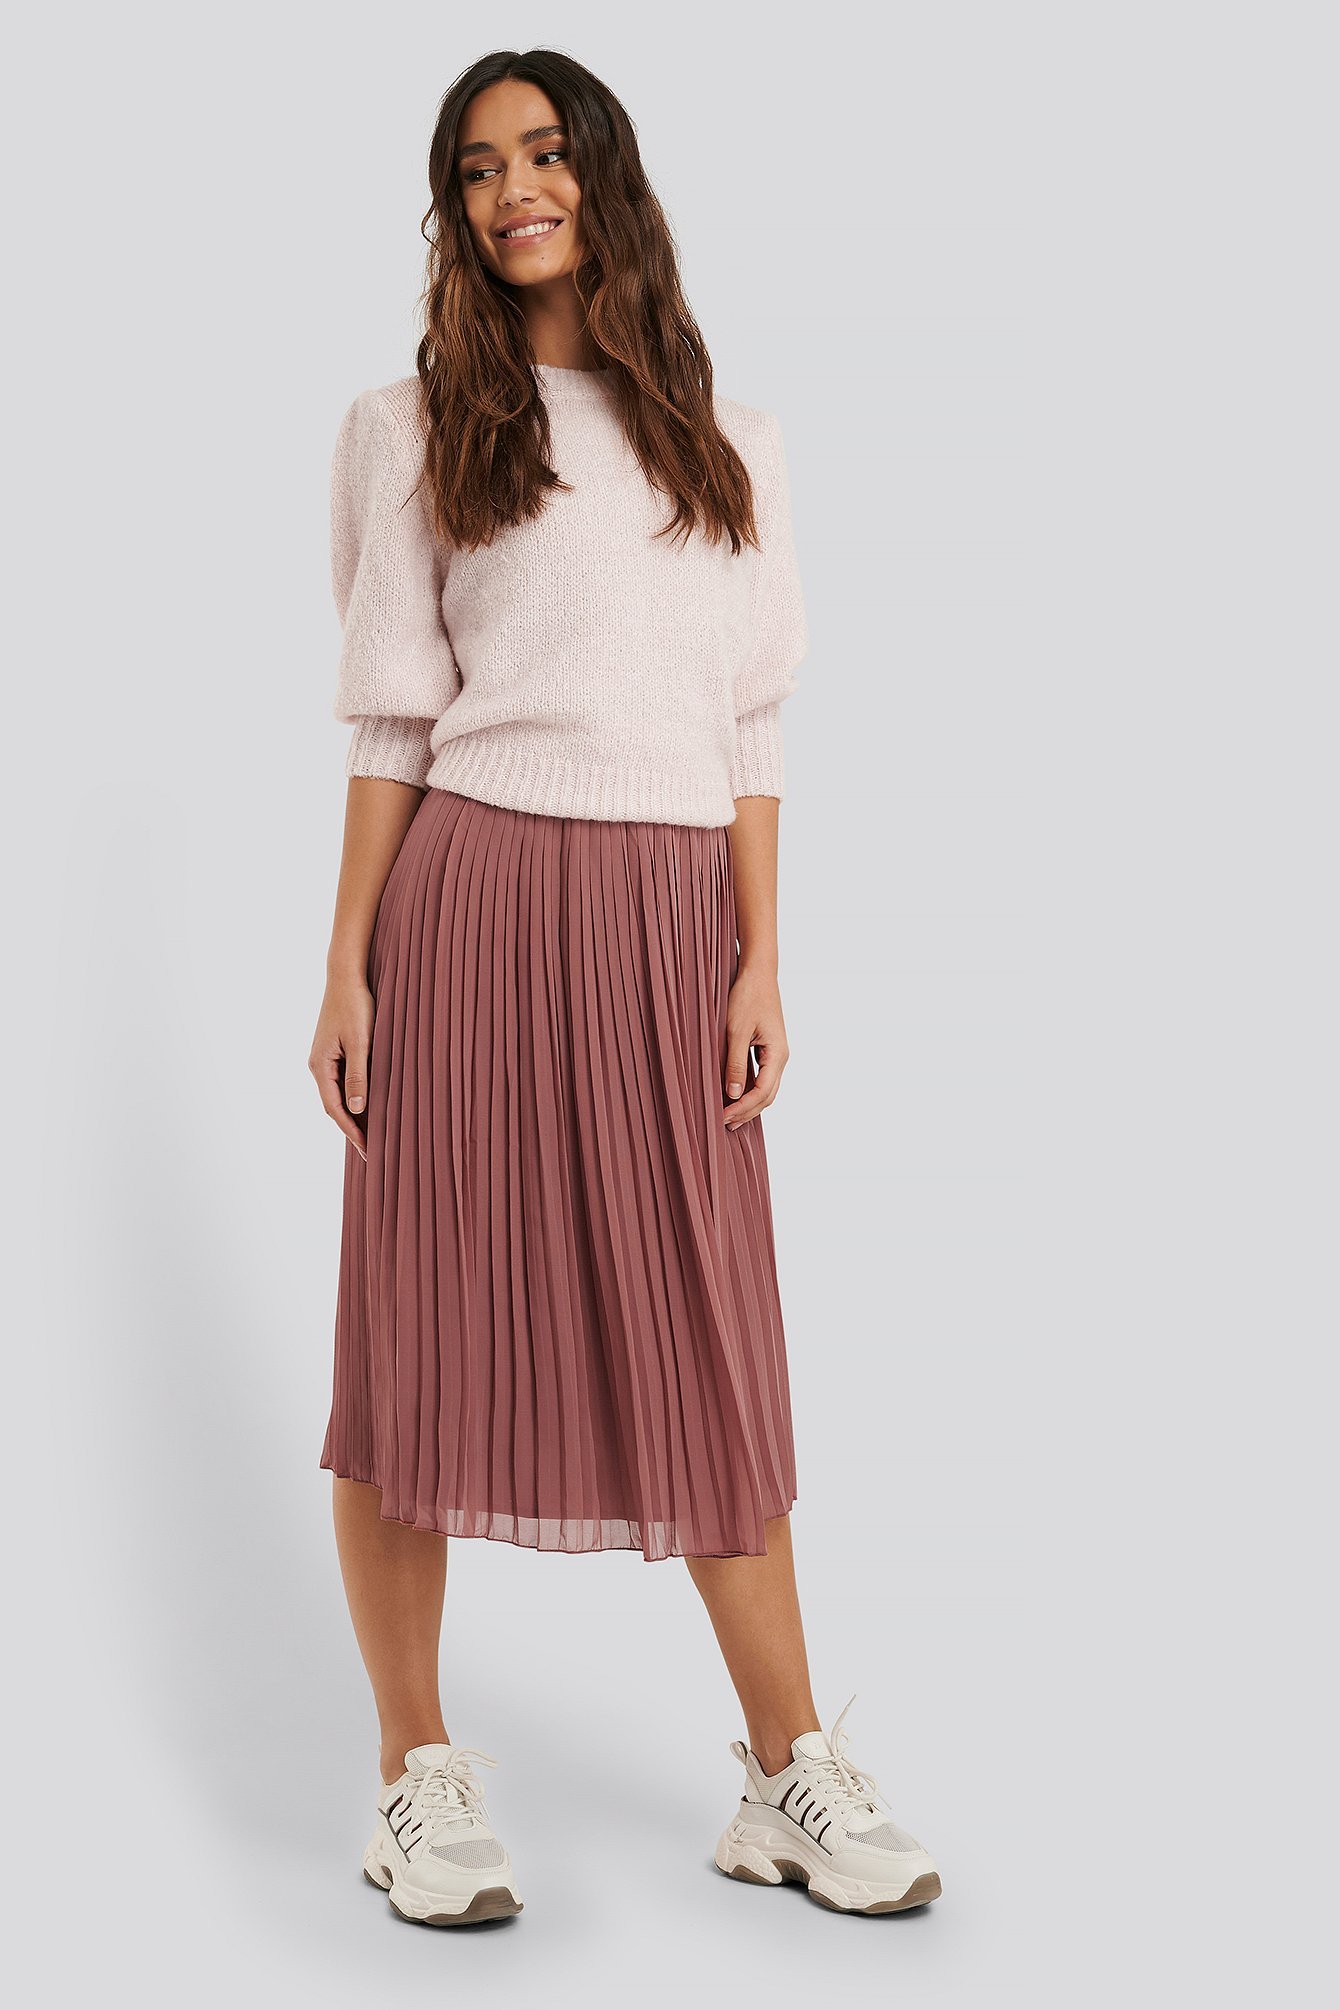 Pleated Midi Skirt Outfit.